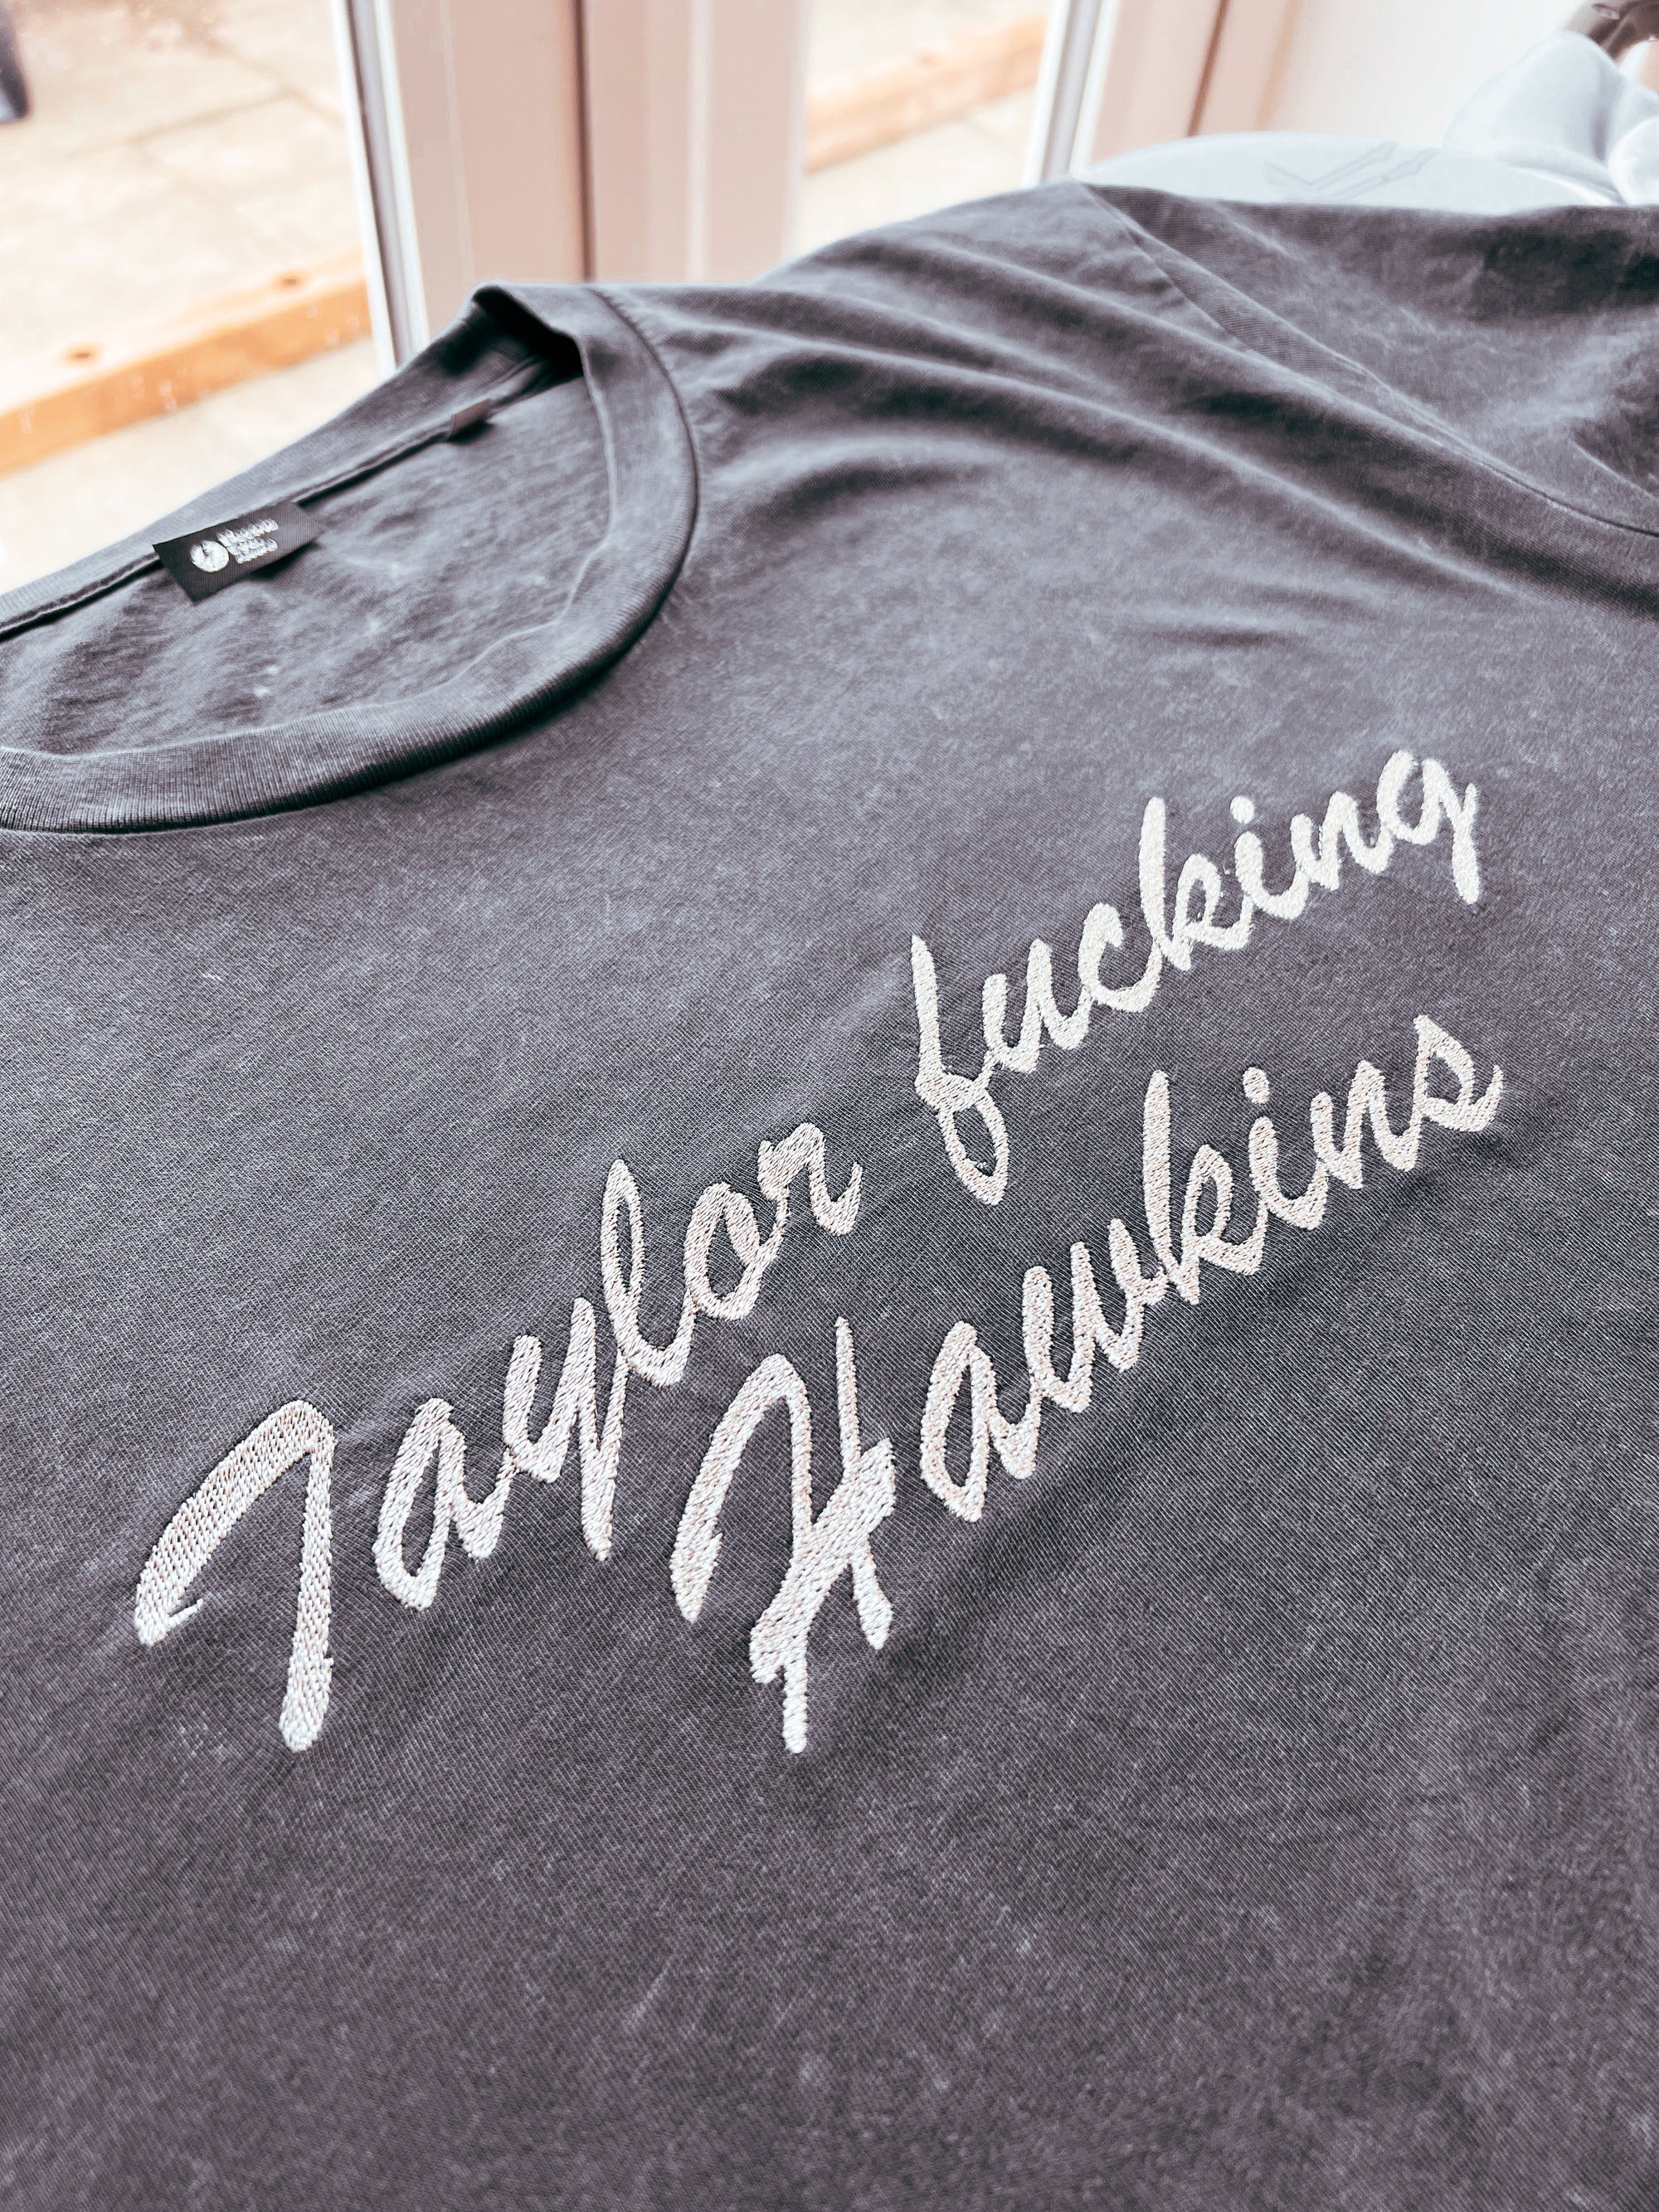 ‘TAYLOR FN HAWKINS’ EMBROIDERED UNISEX VINTAGE GARMENT DYED ORGANIC COTTON T-SHIRT